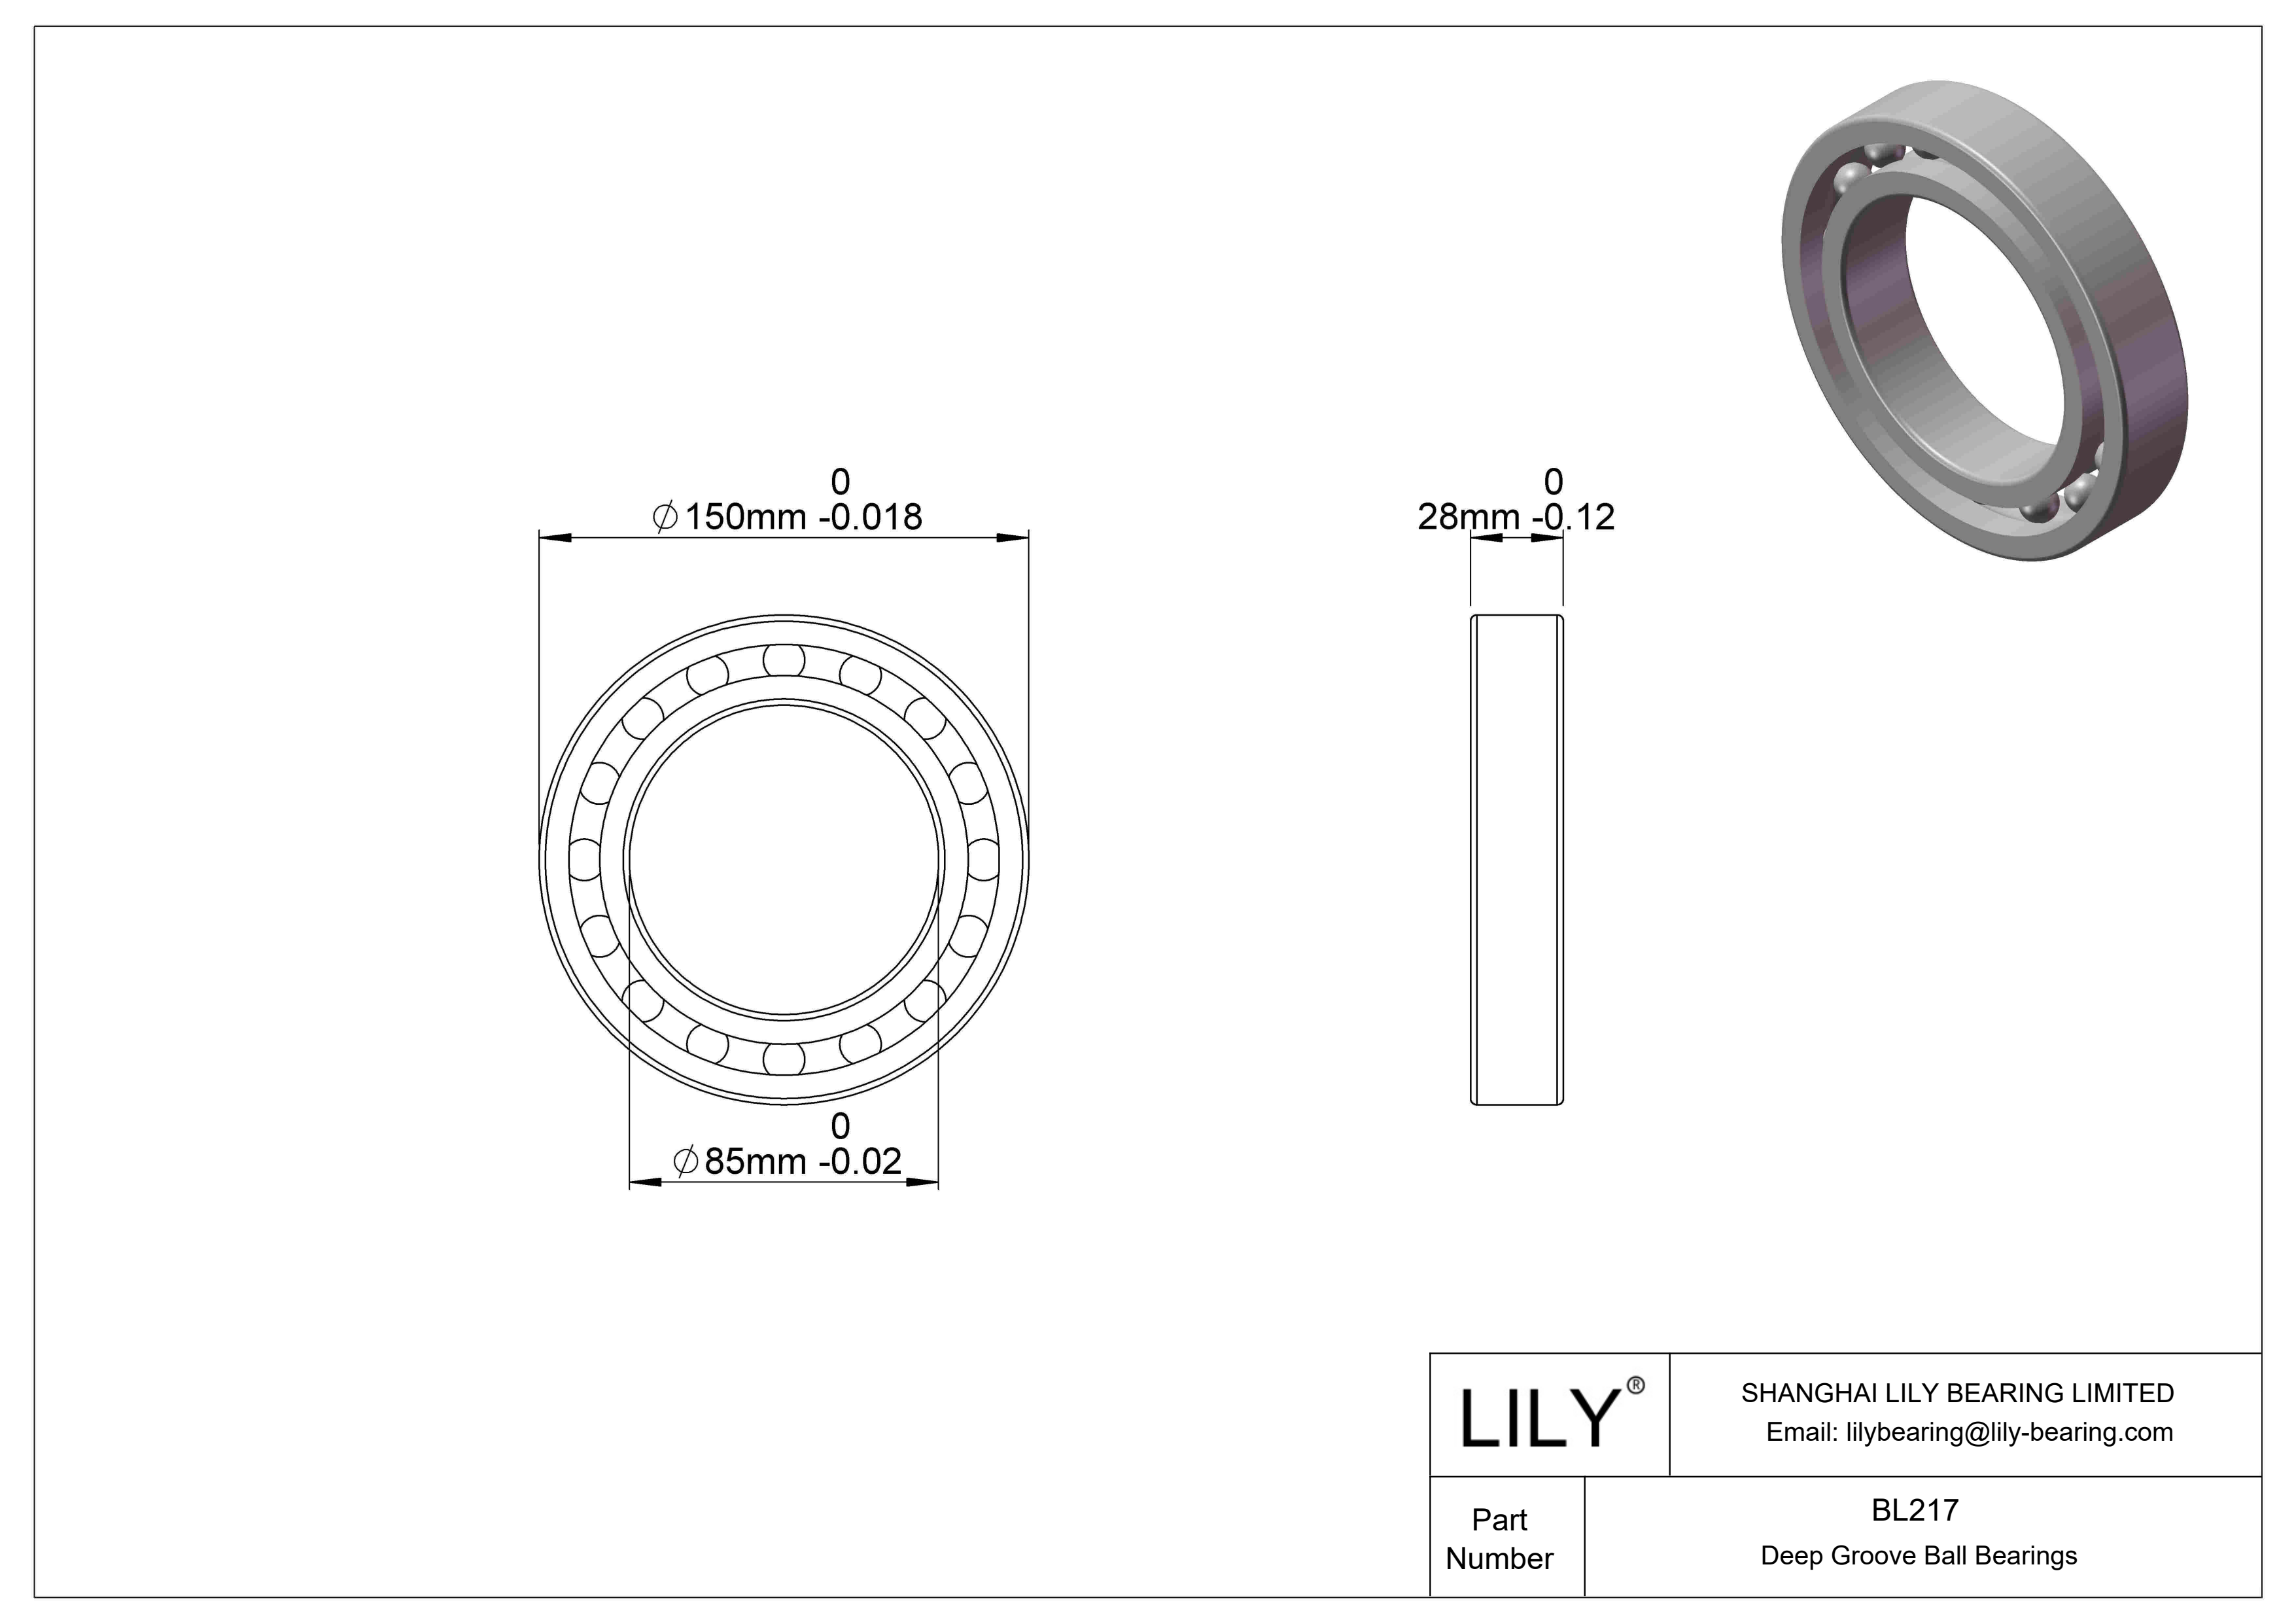 BL217 General Deep Groove Ball Bearing cad drawing